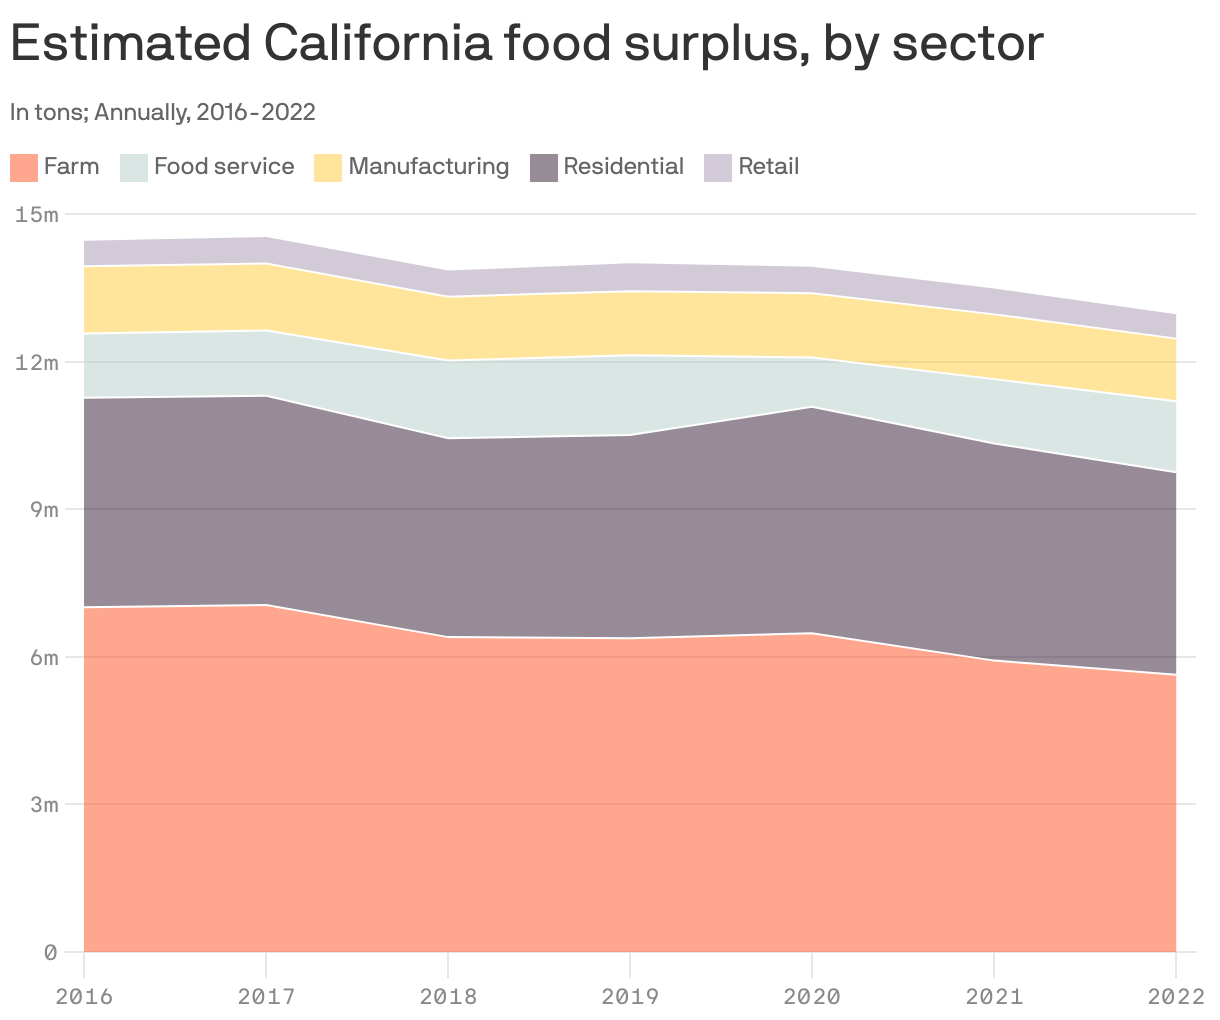 Estimated California food surplus, by sector